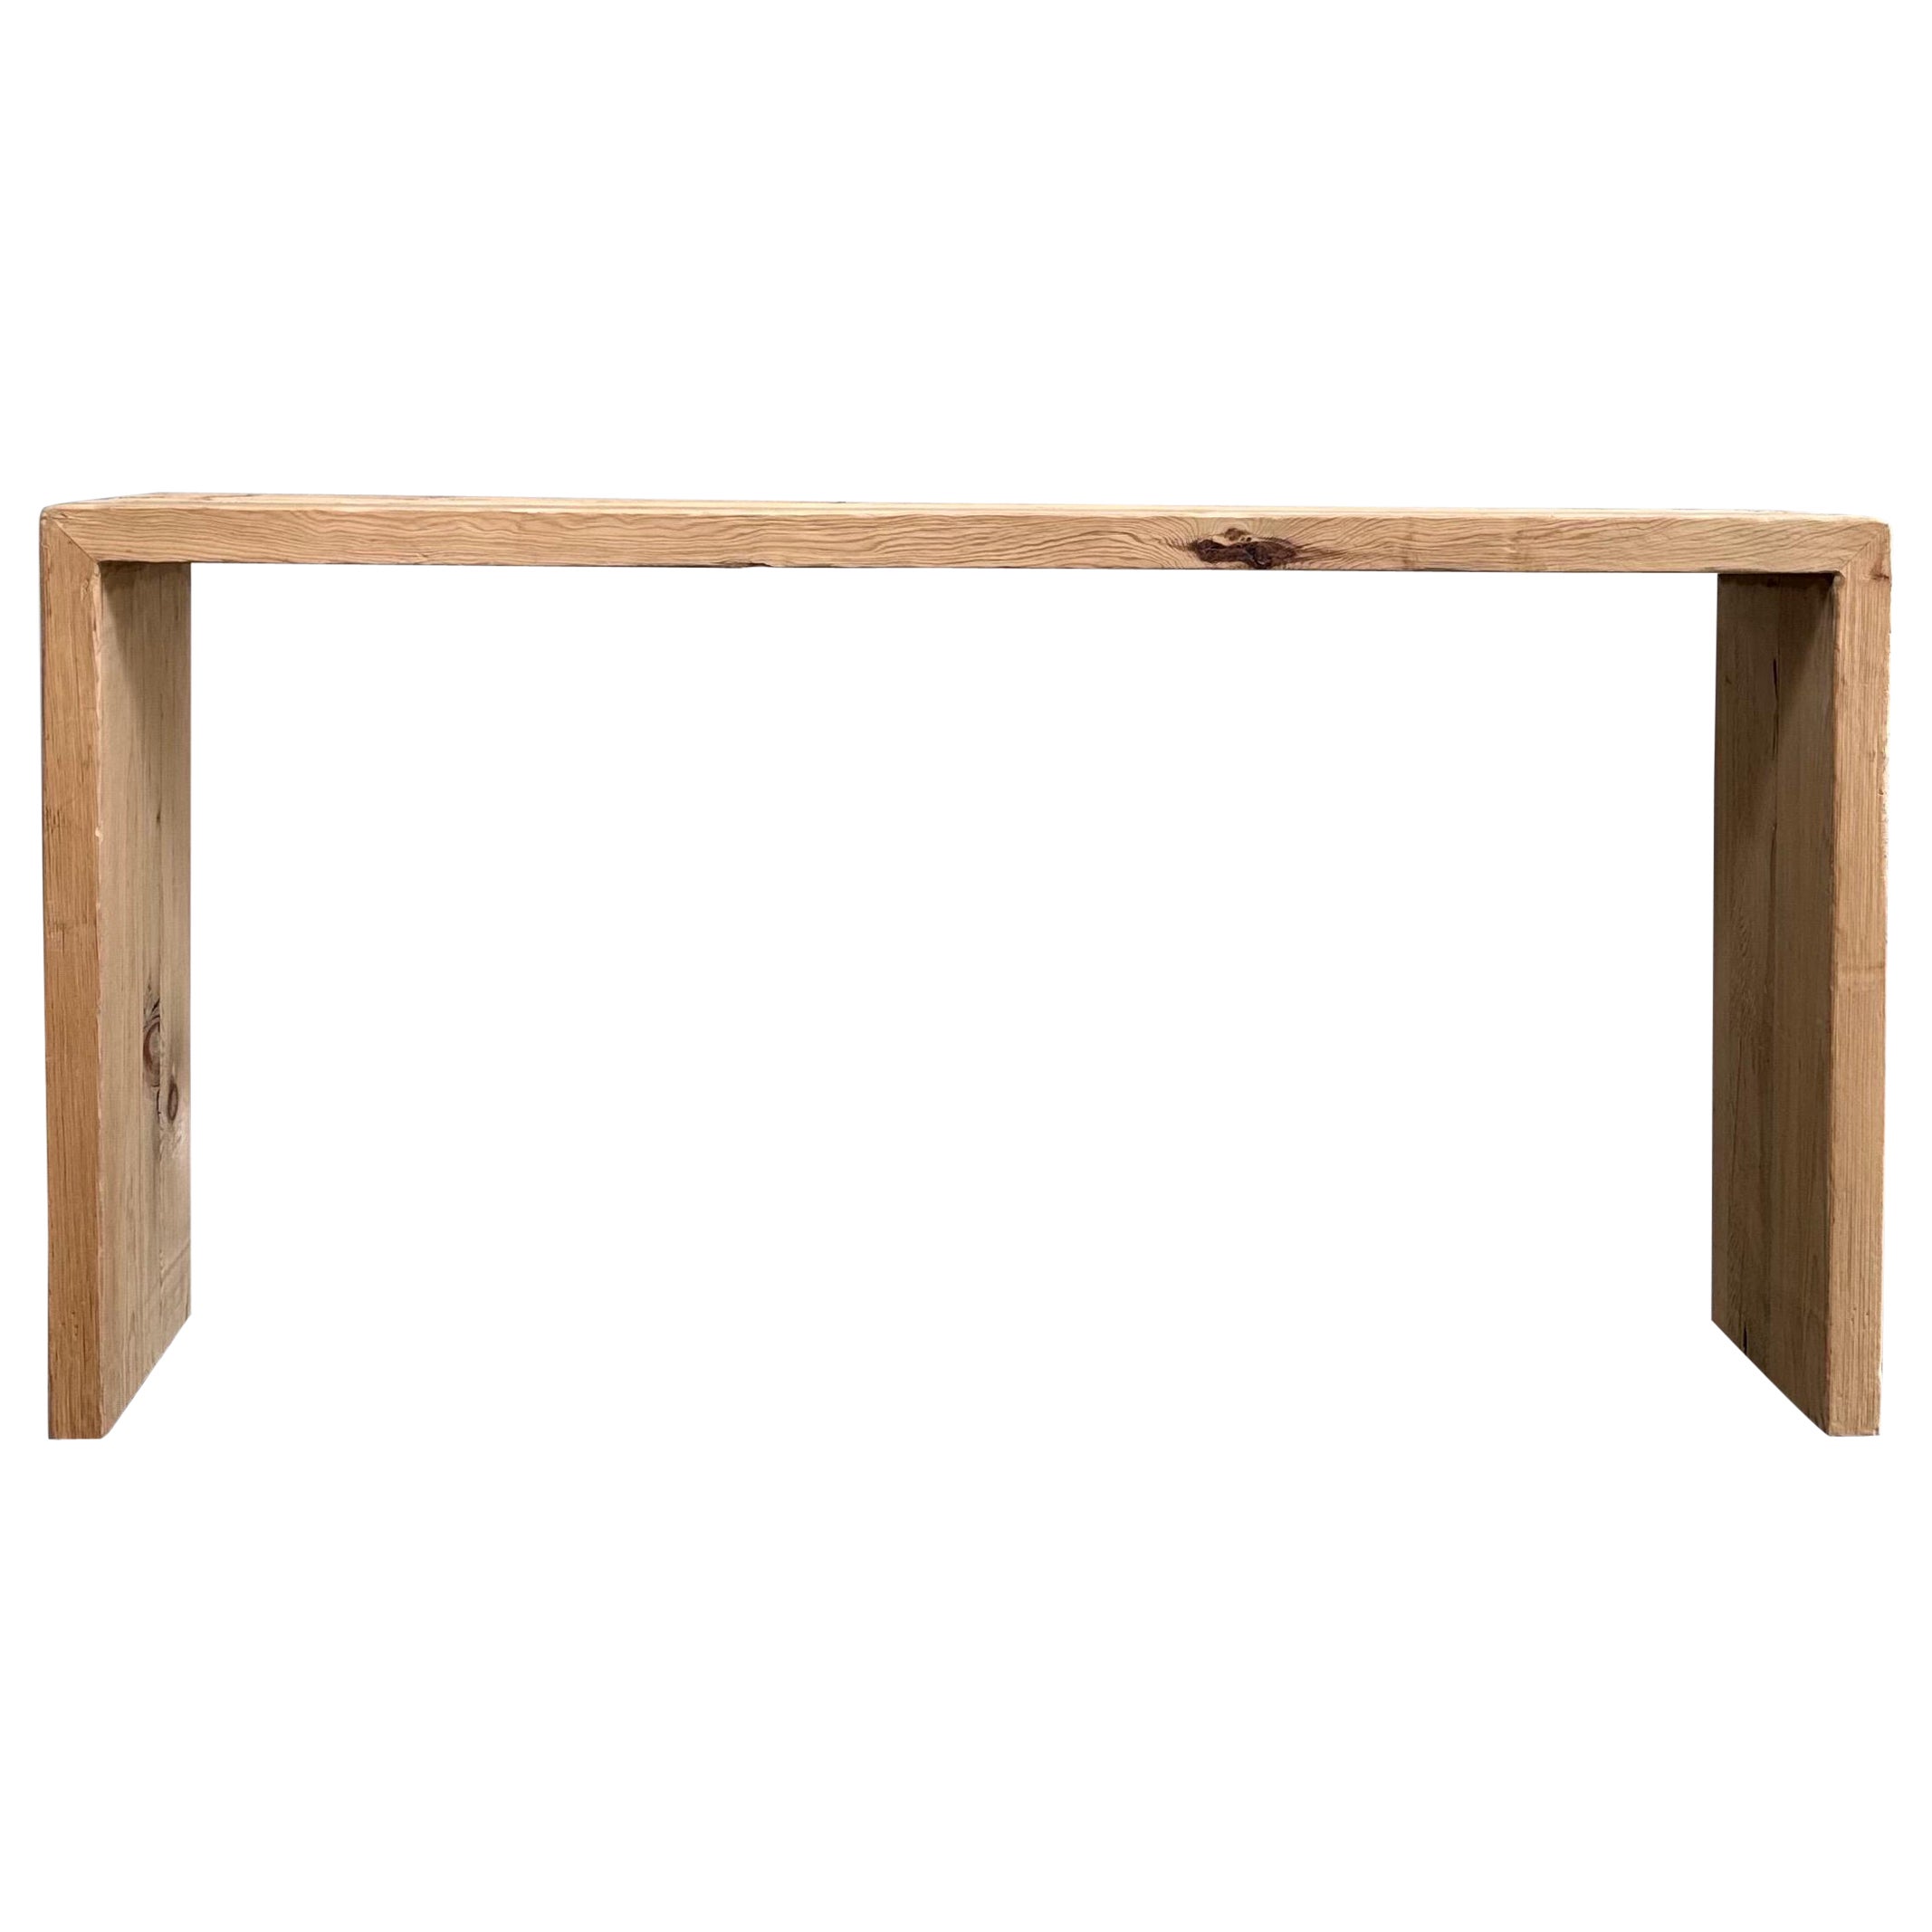 Vintage Cypress Wood Waterfall Style Console Table For Sale